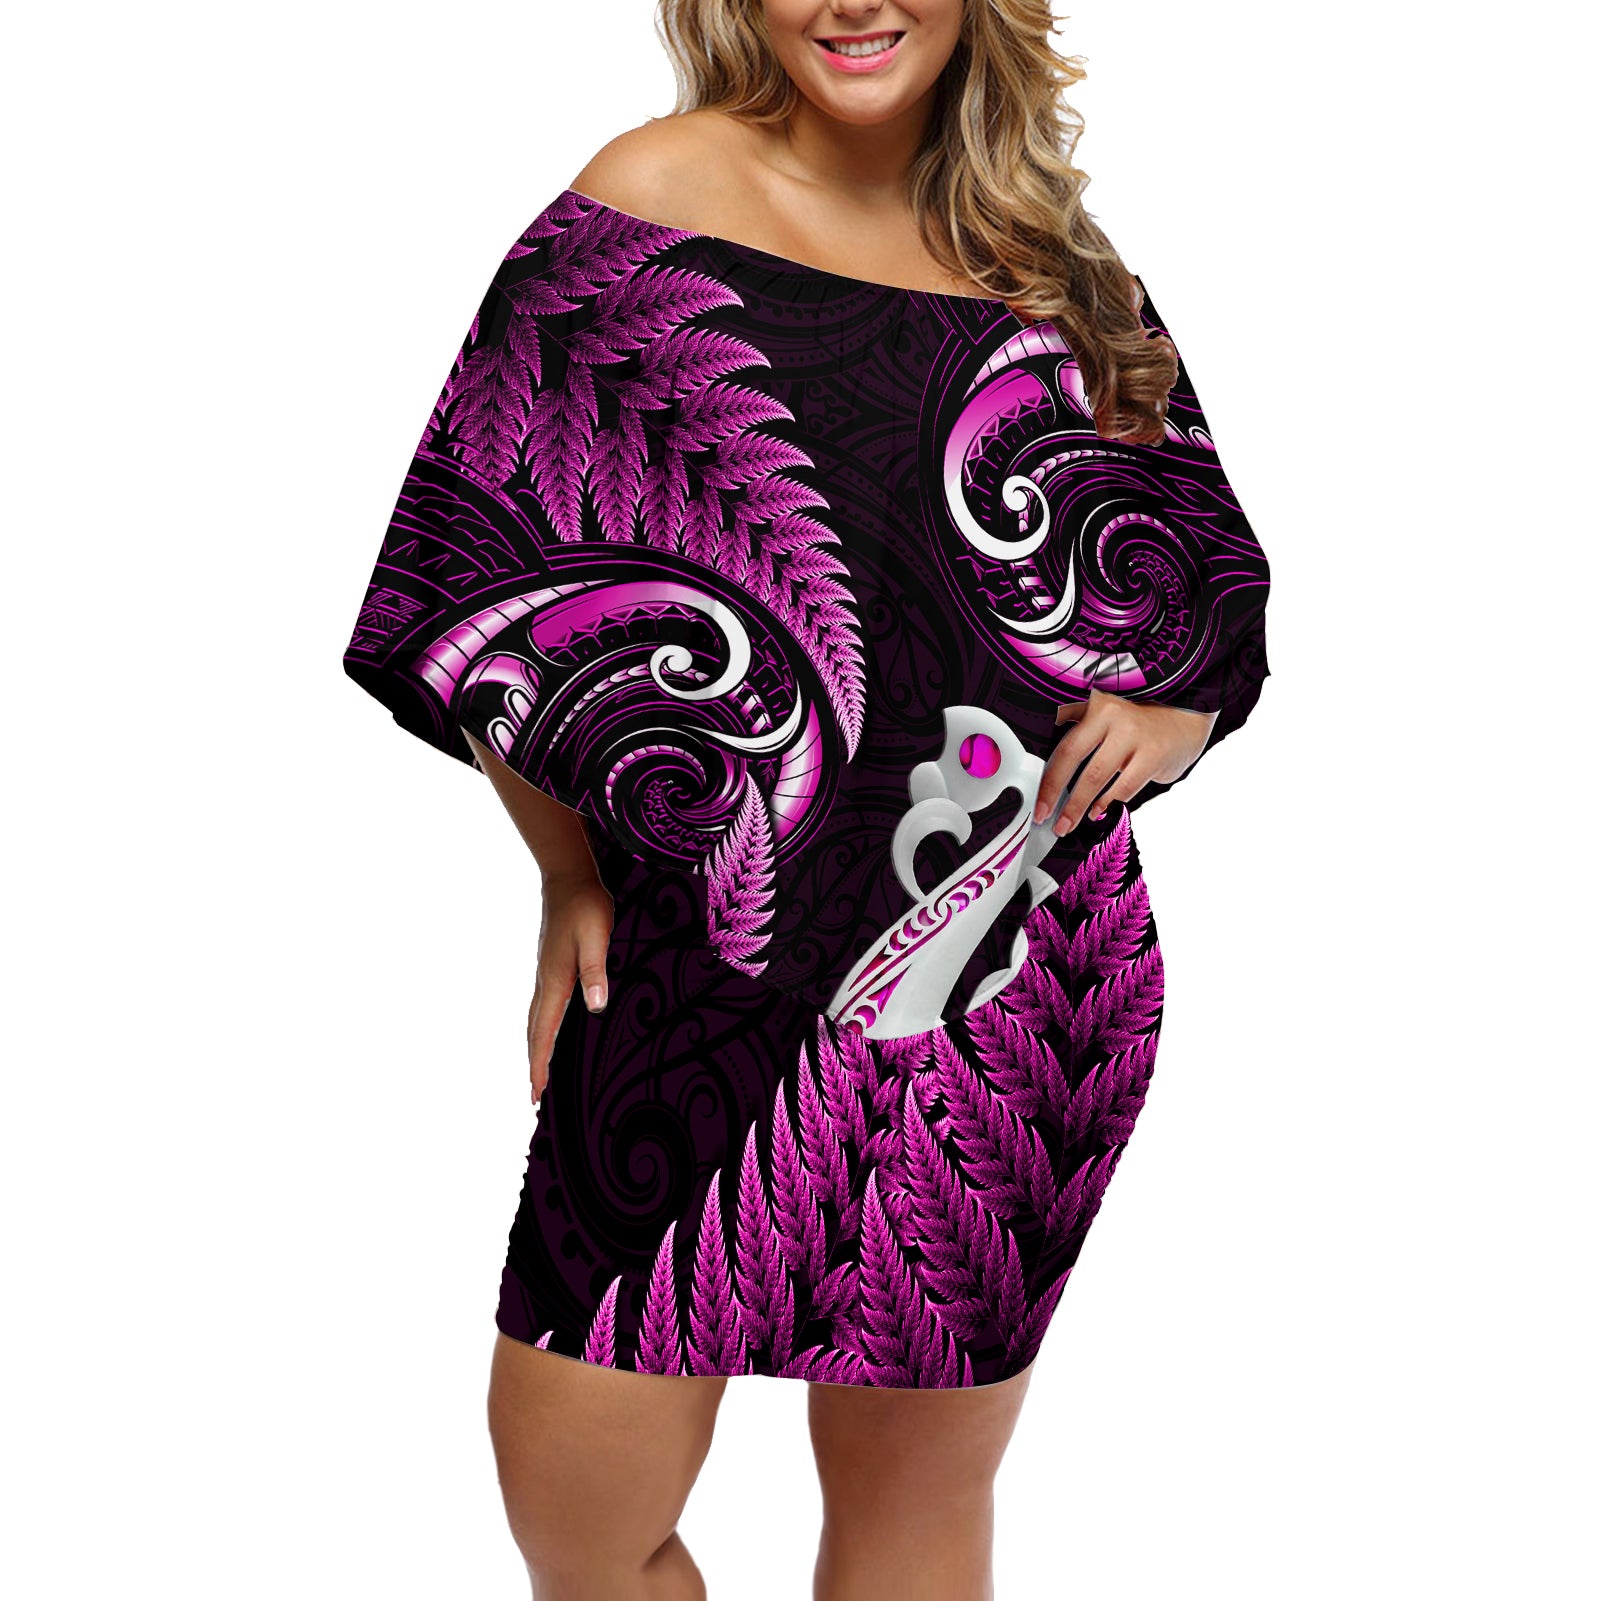 Personalised New Zealand Off Shoulder Short Dress Aotearoa Silver Fern With Manaia Maori Unique Pink LT14 Women Pink - Polynesian Pride